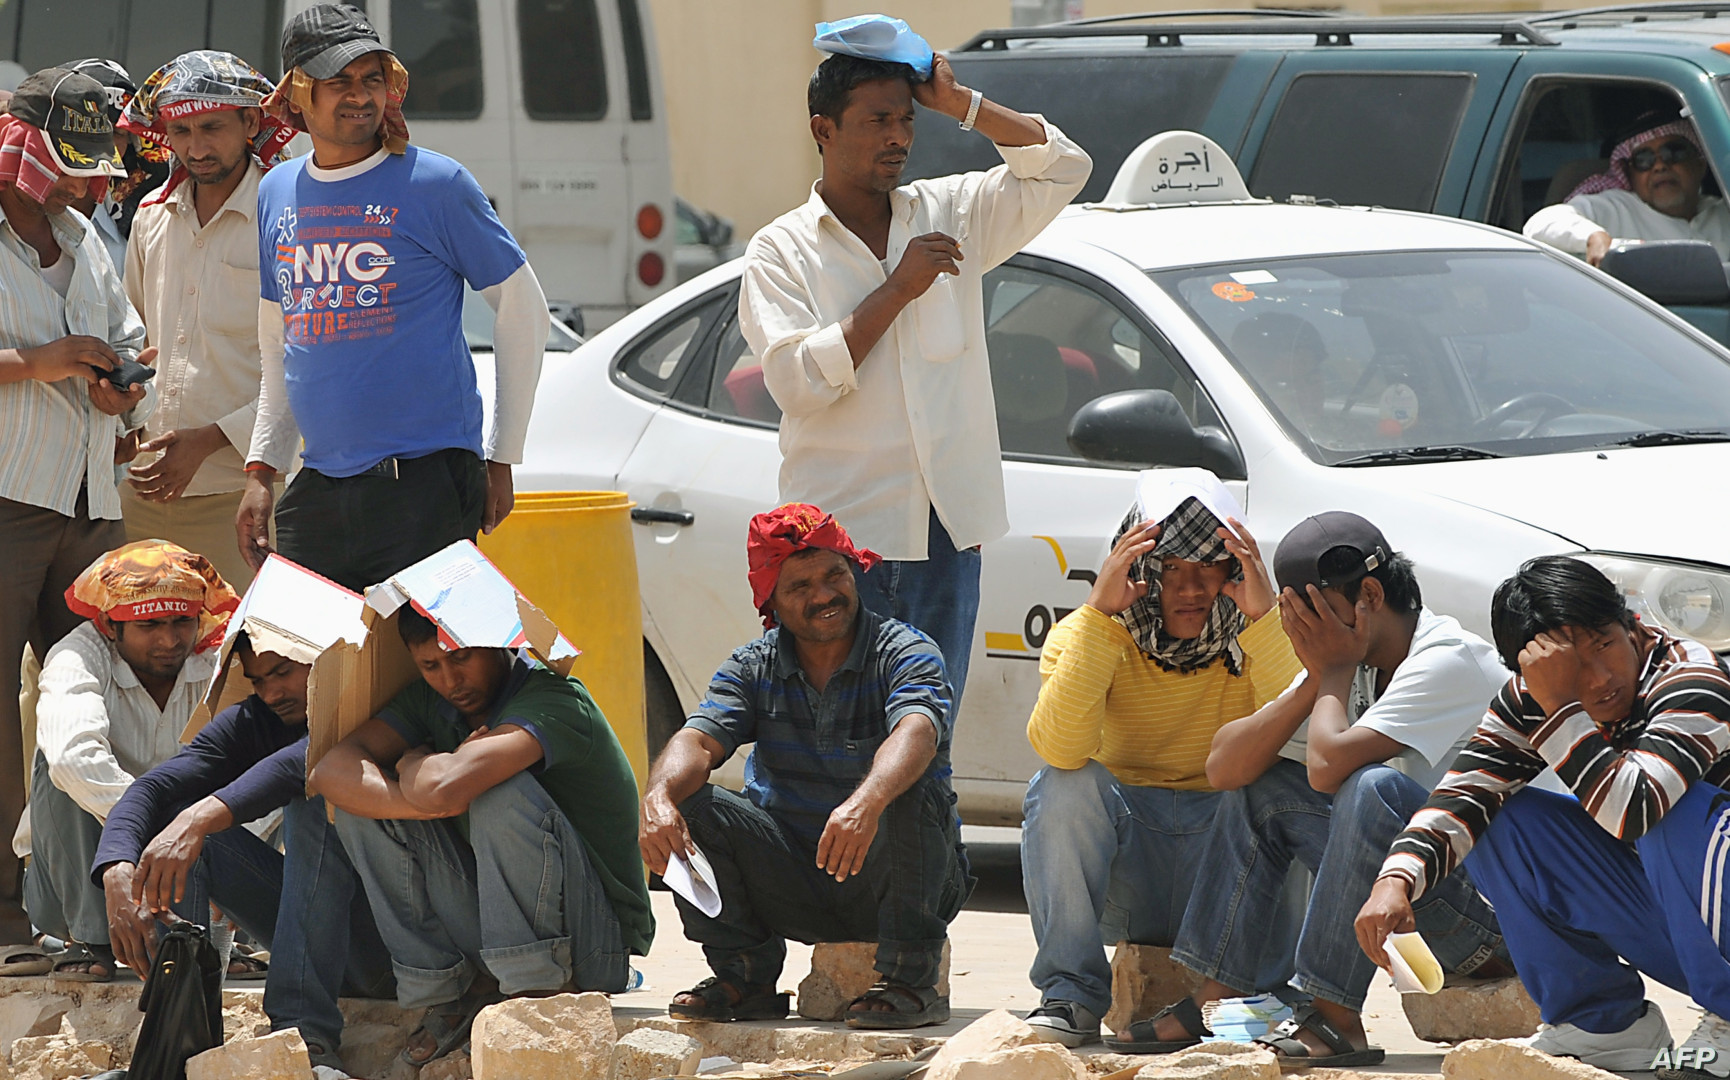 Iraq sees influx of Bangladeshi workers, many undocumented: minister